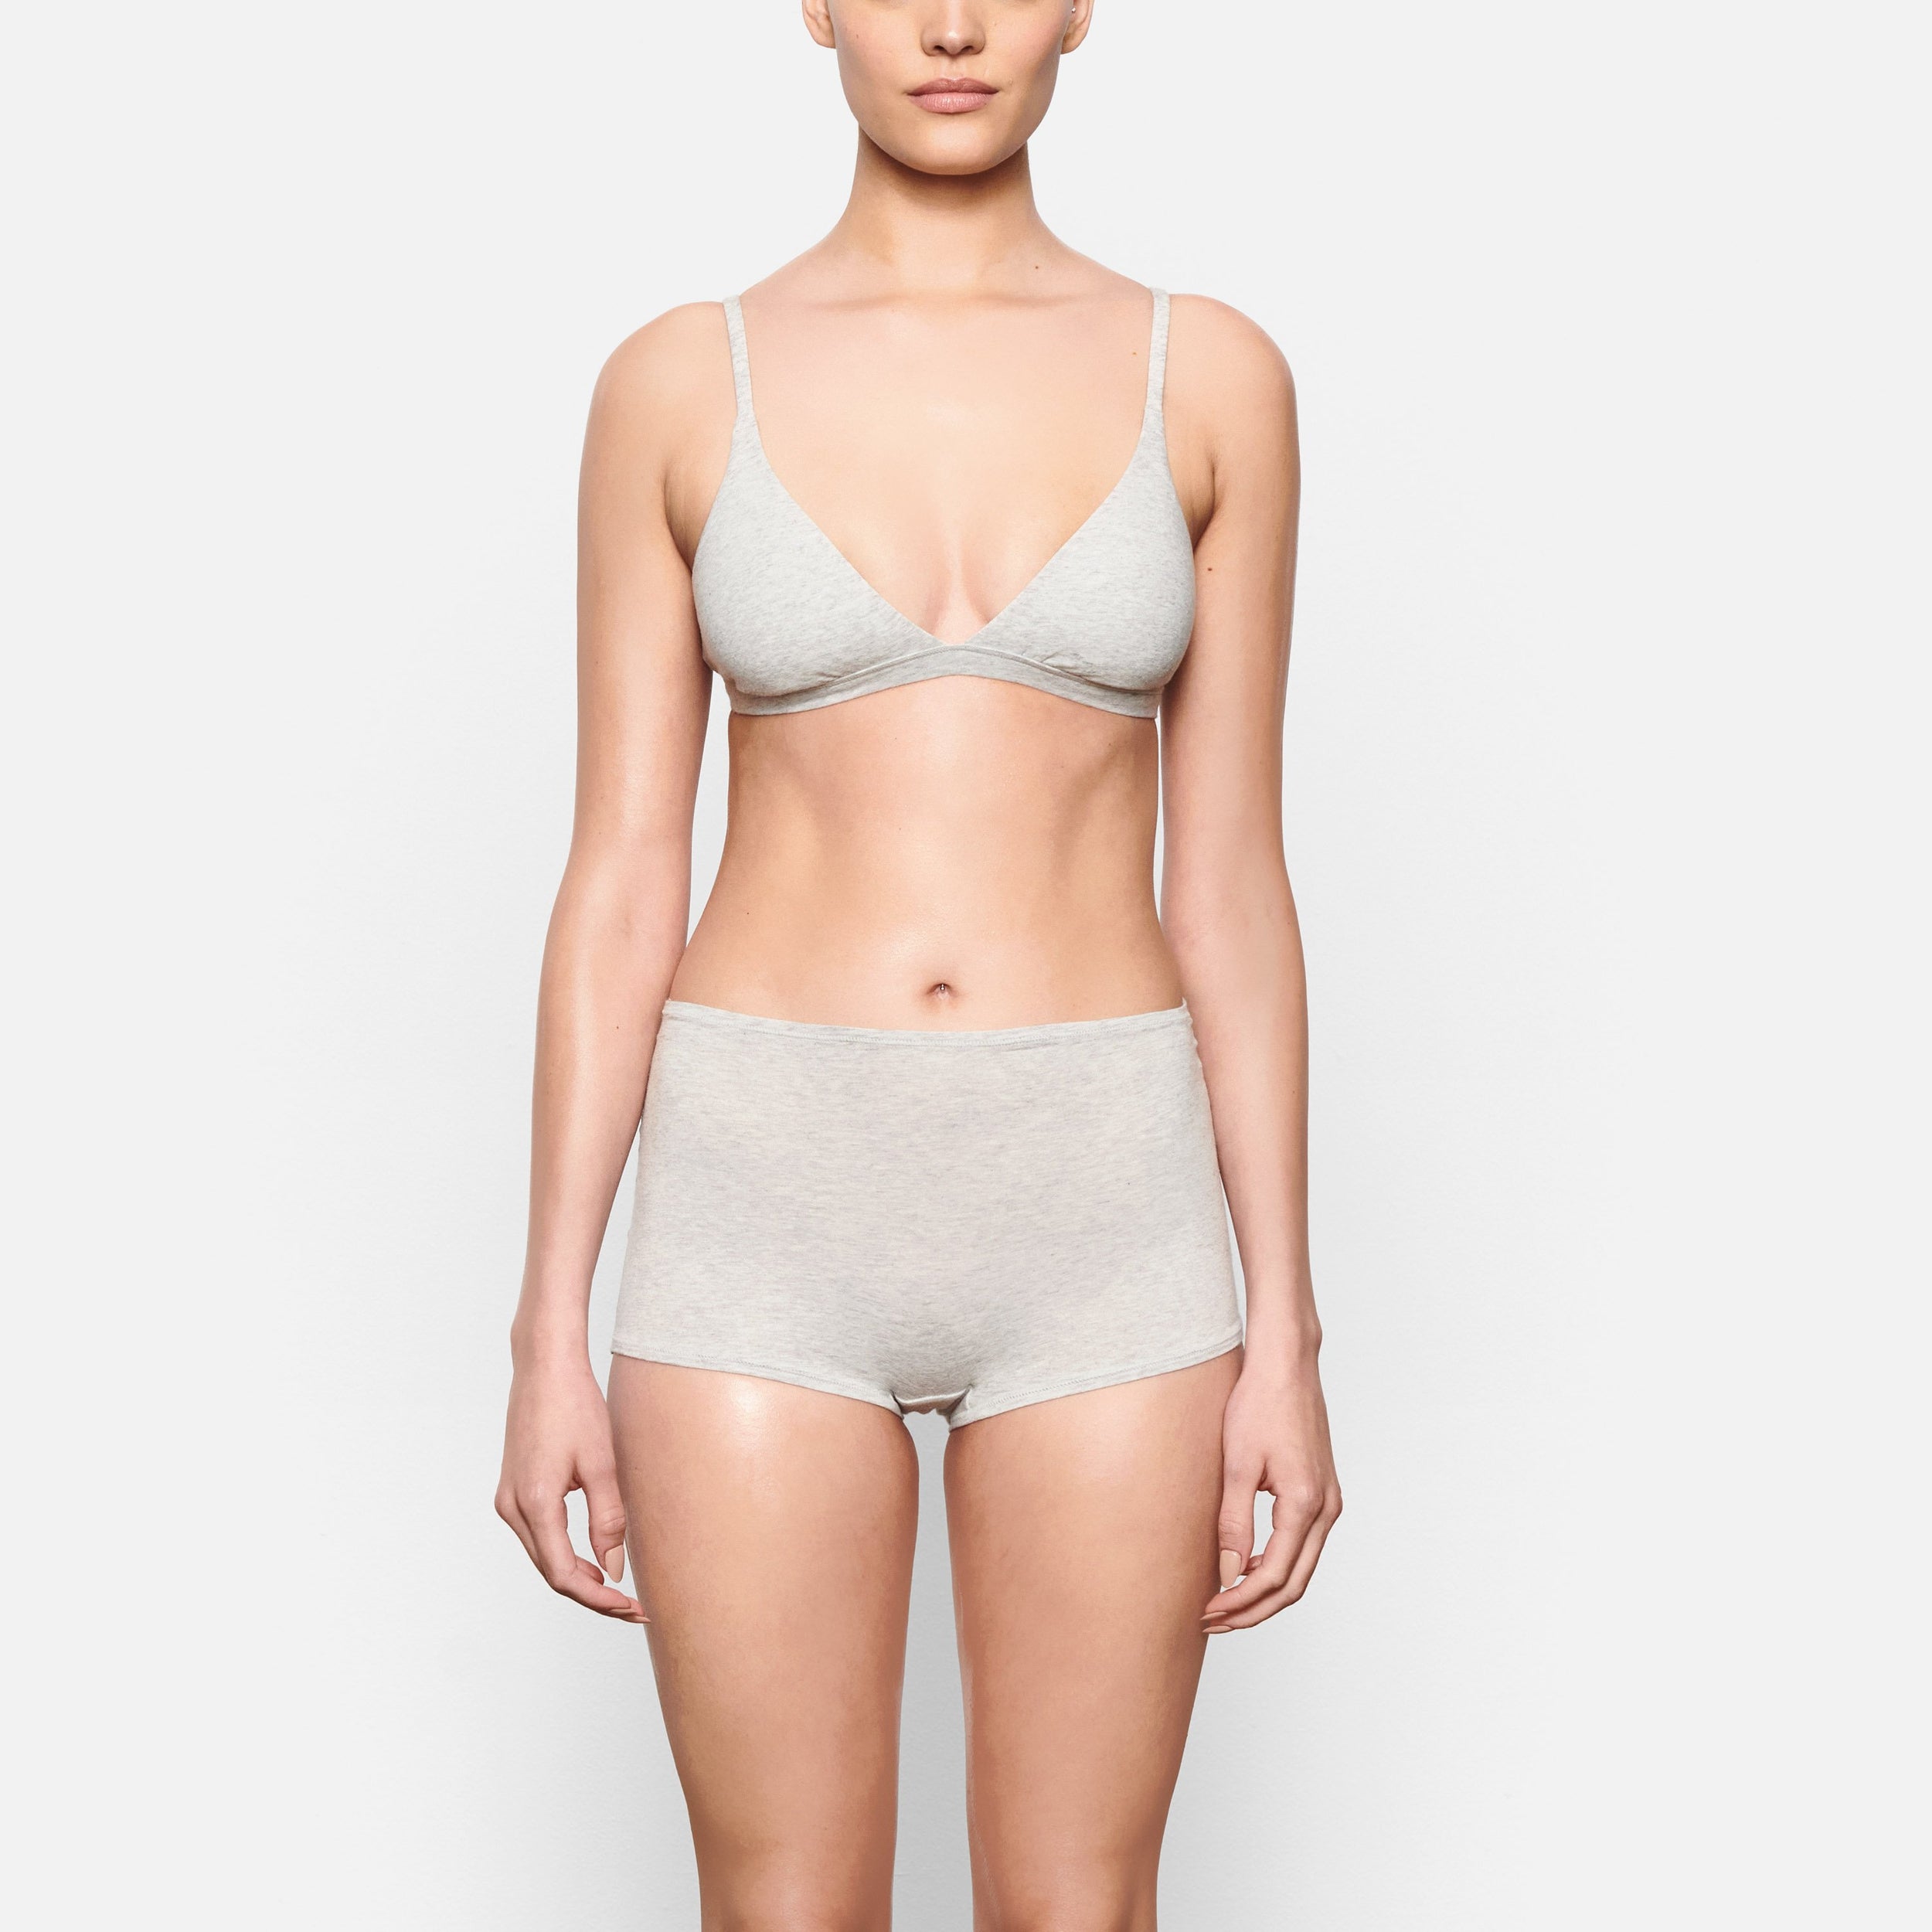 SKIMS - Classic and comfortable, the Cotton Triangle Bralette is